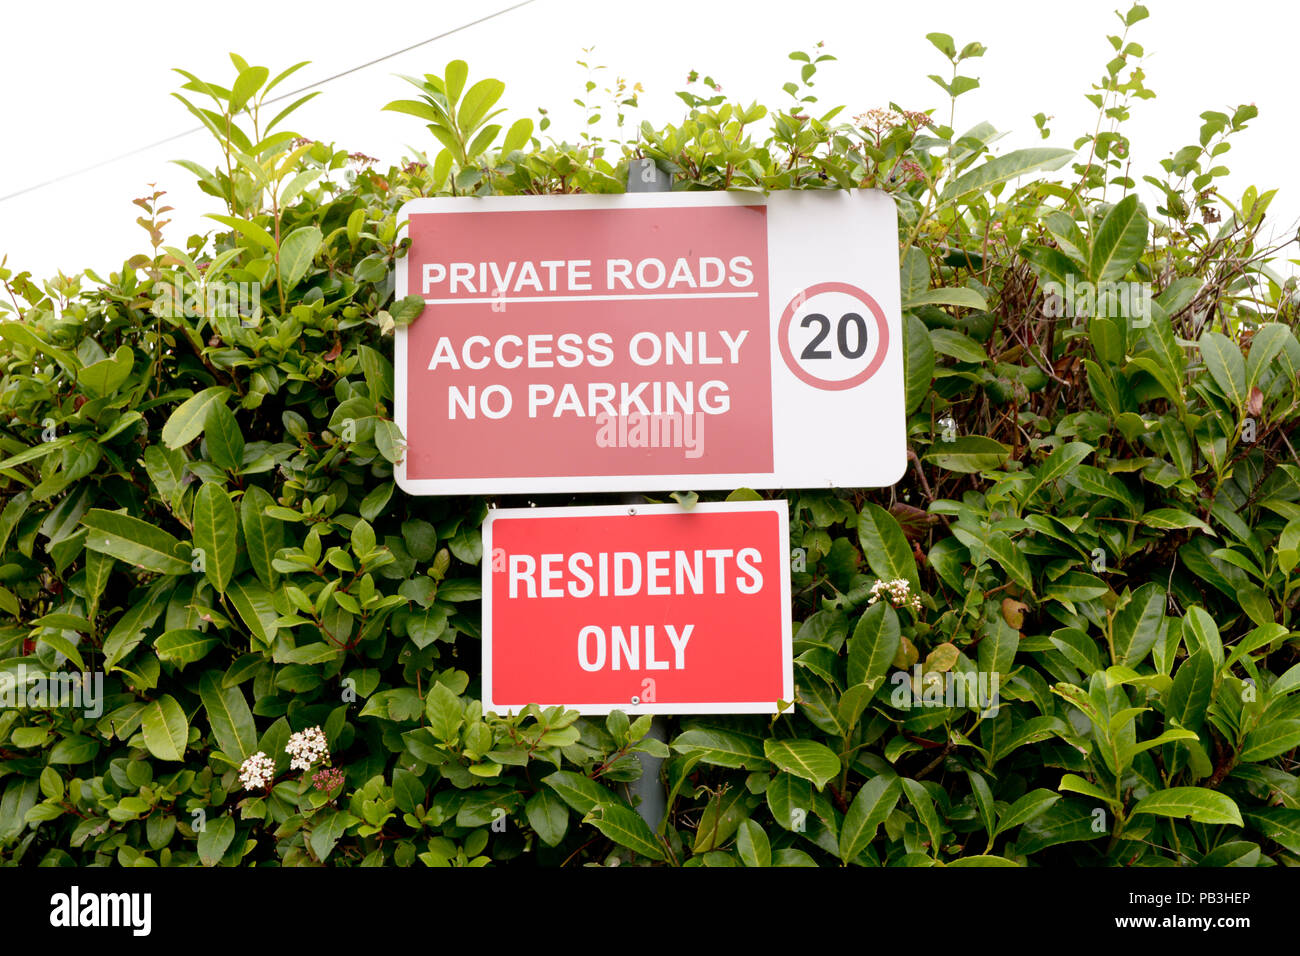 Private Road - Access Only no Parking - Spped Limit 20mph and Residents Only signs Stock Photo